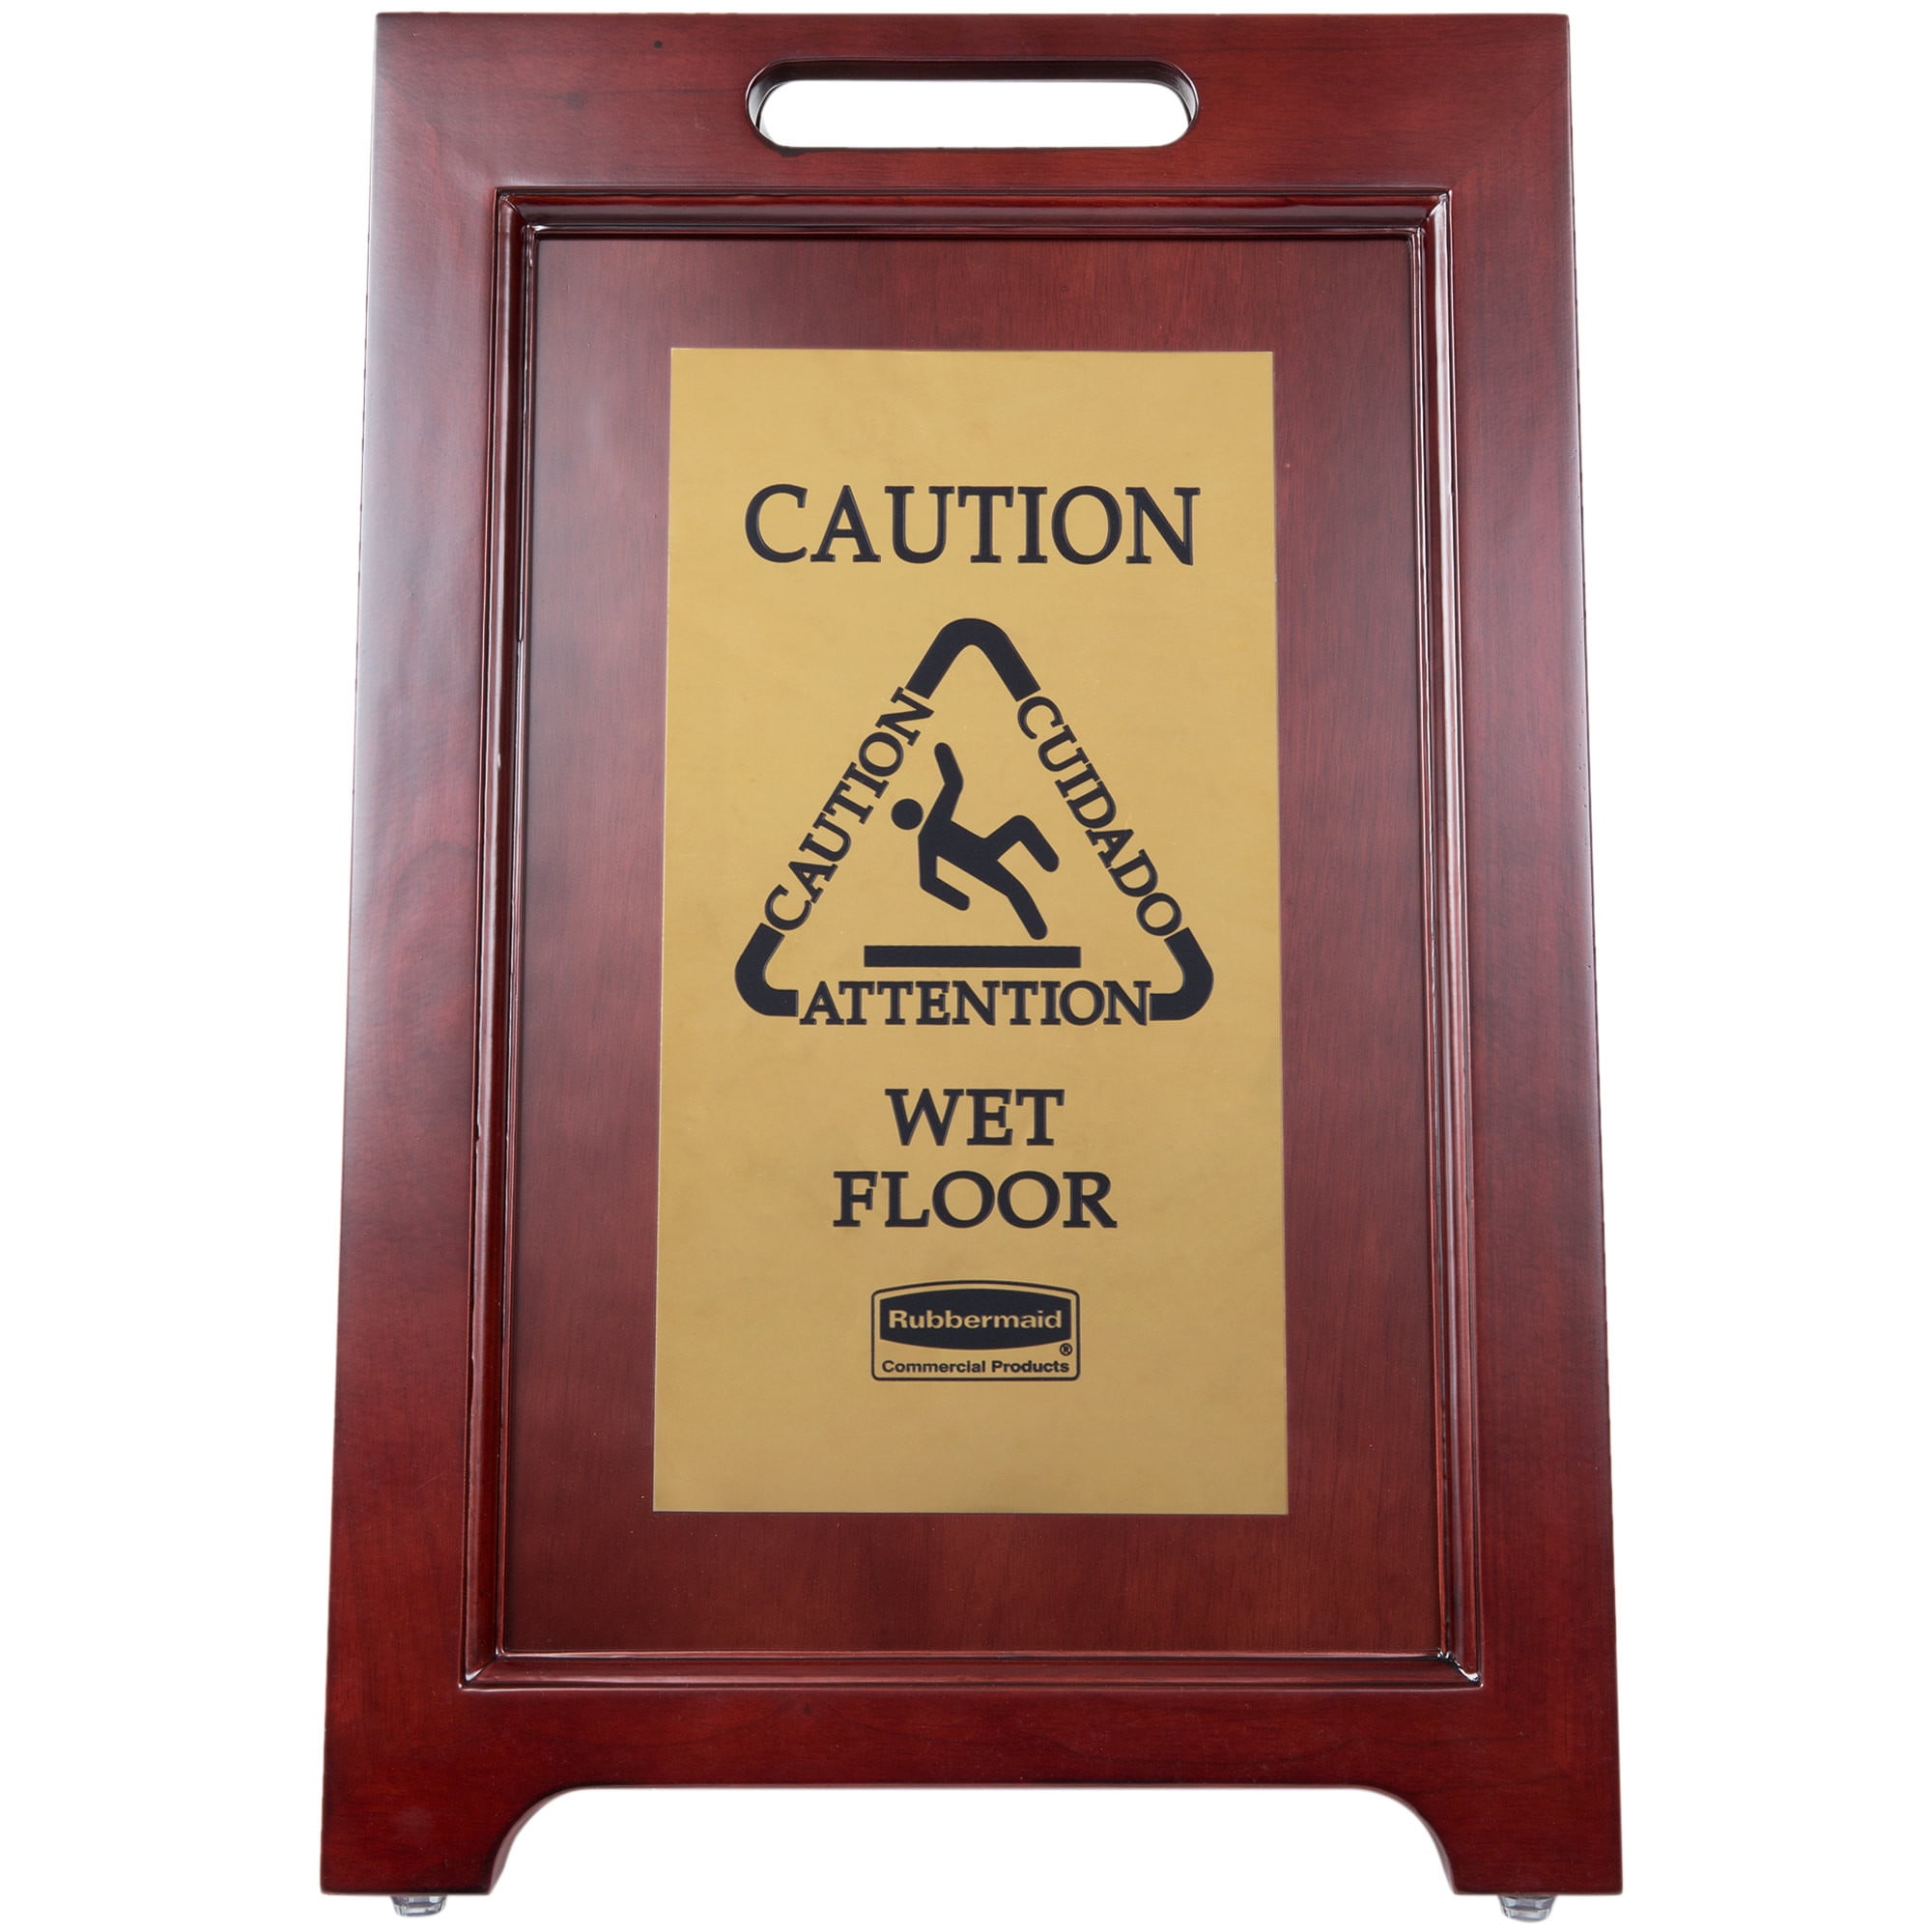 NEW Rubbermaid Solid Wood Wet Floor Sign Executive Brass 1867507 